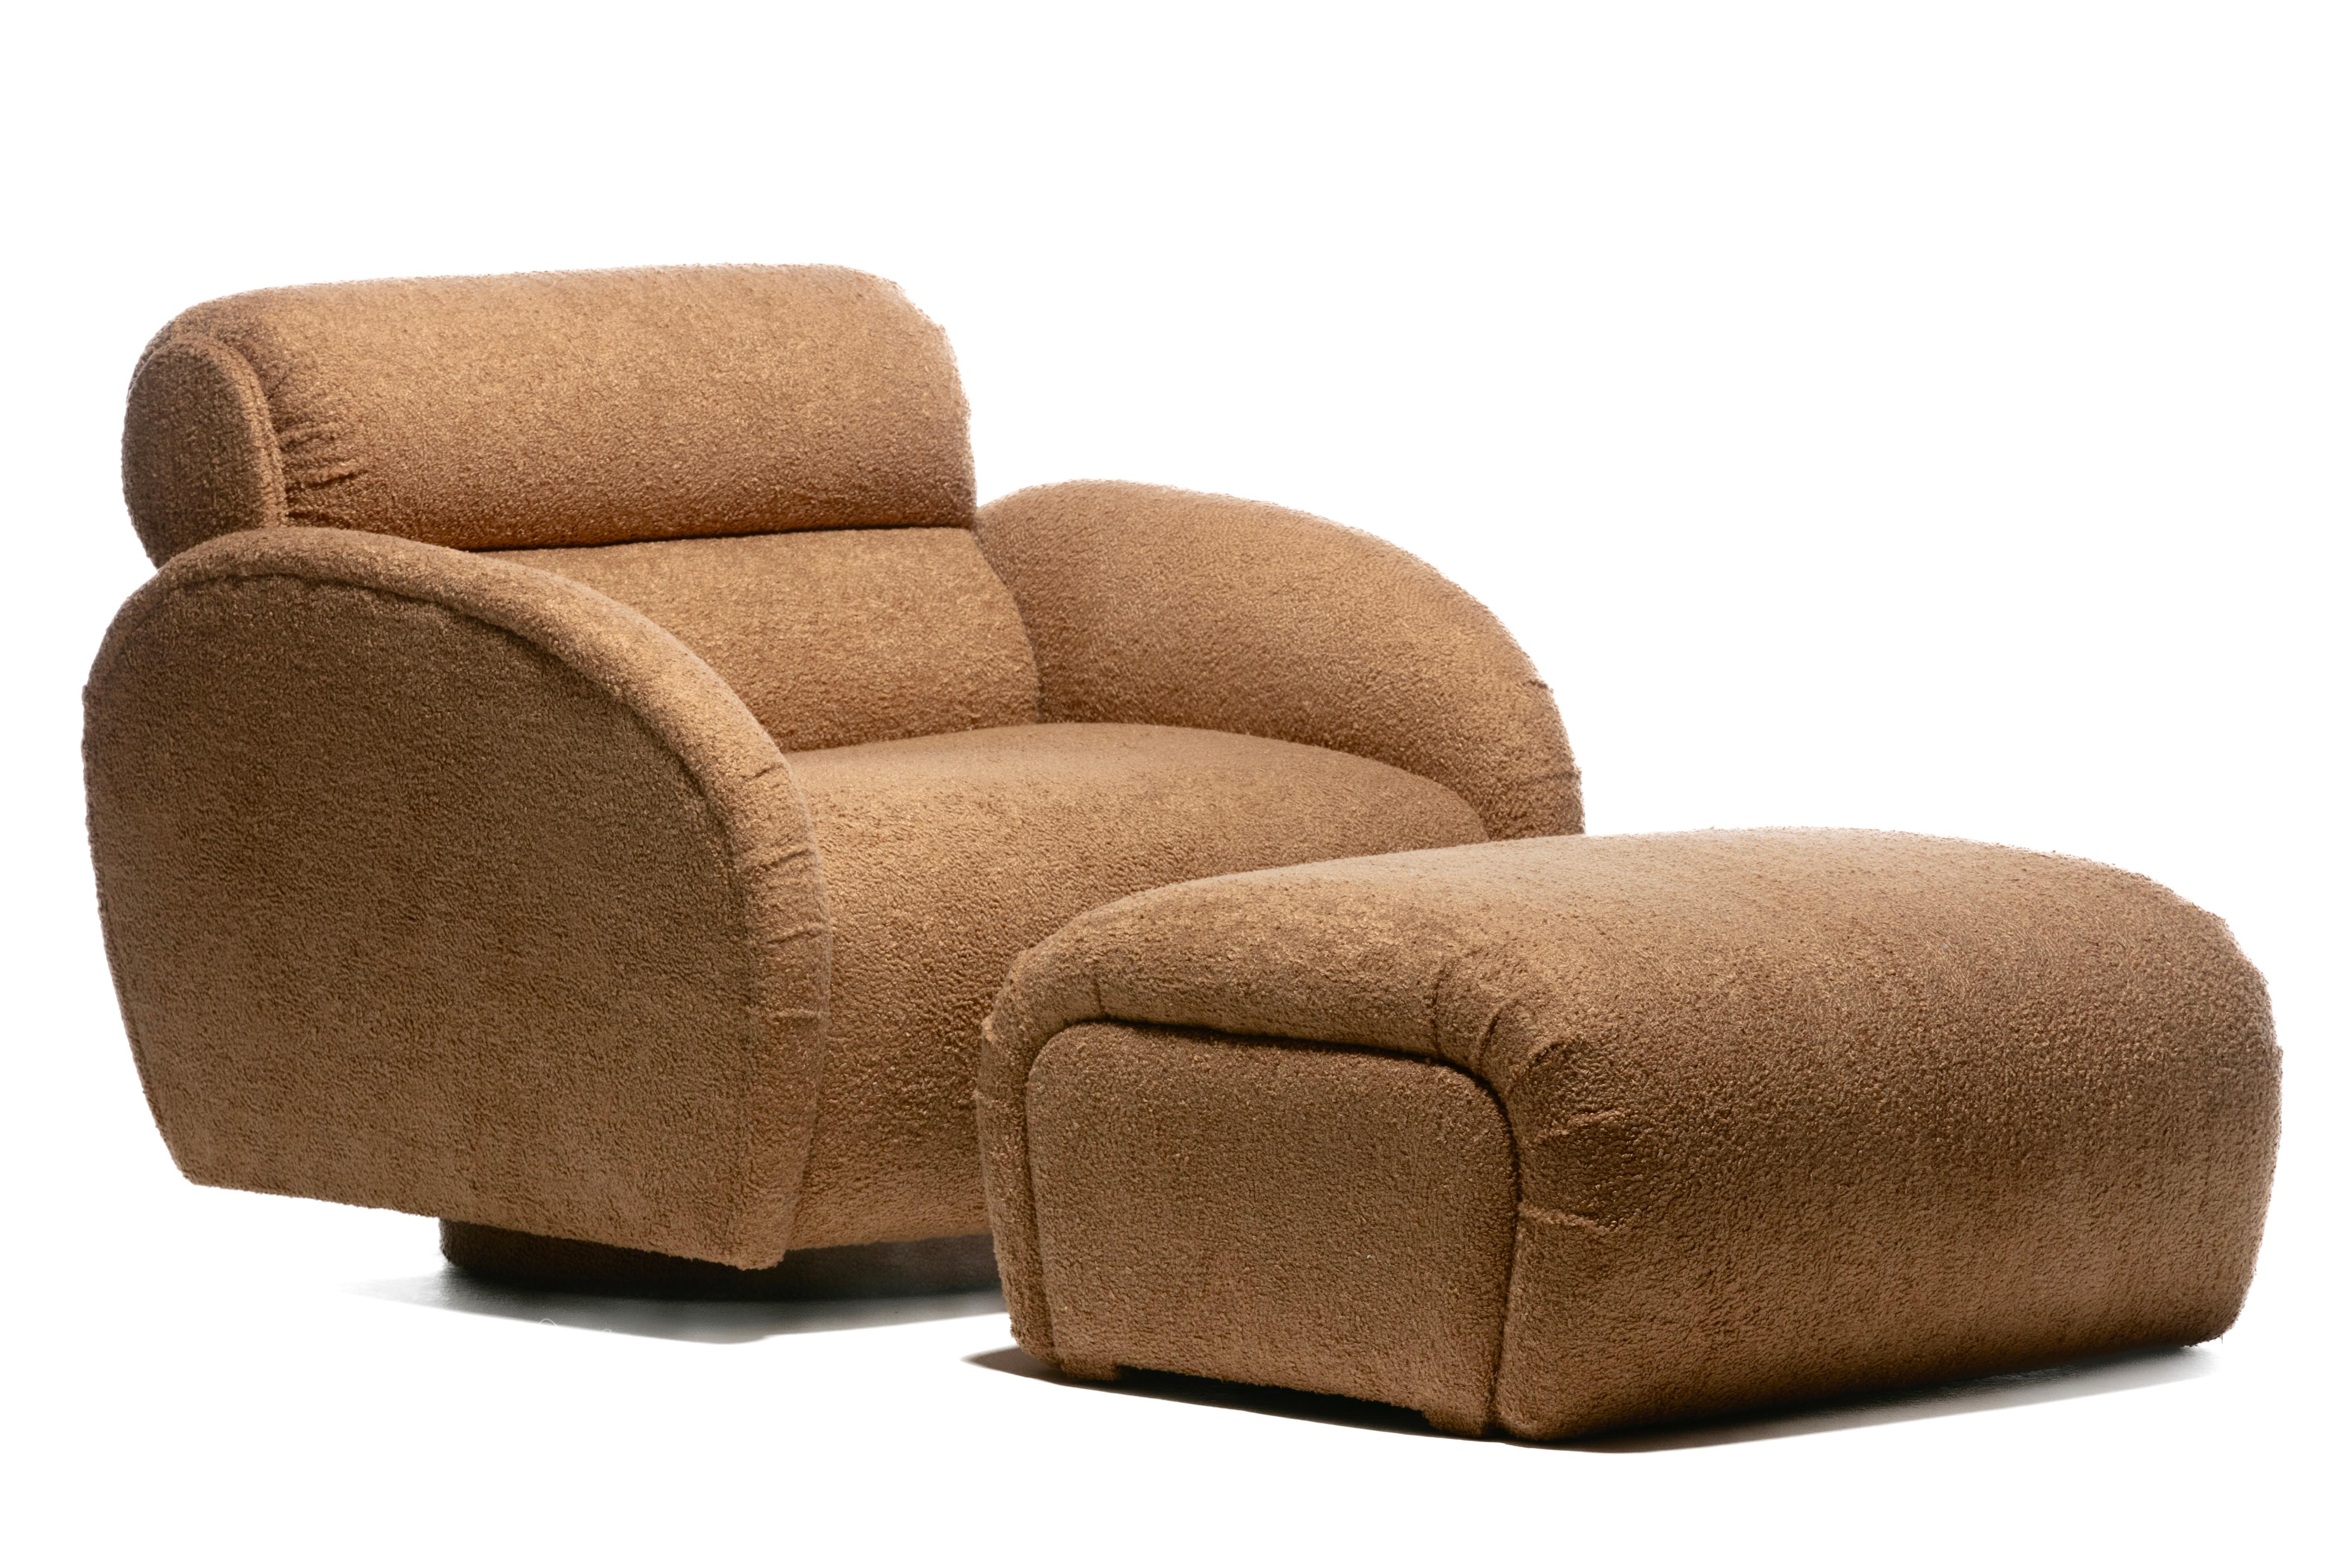 Large Scale Directional Post Modern Swivel Chairs & Ottoman in Mocha Fabric For Sale 12